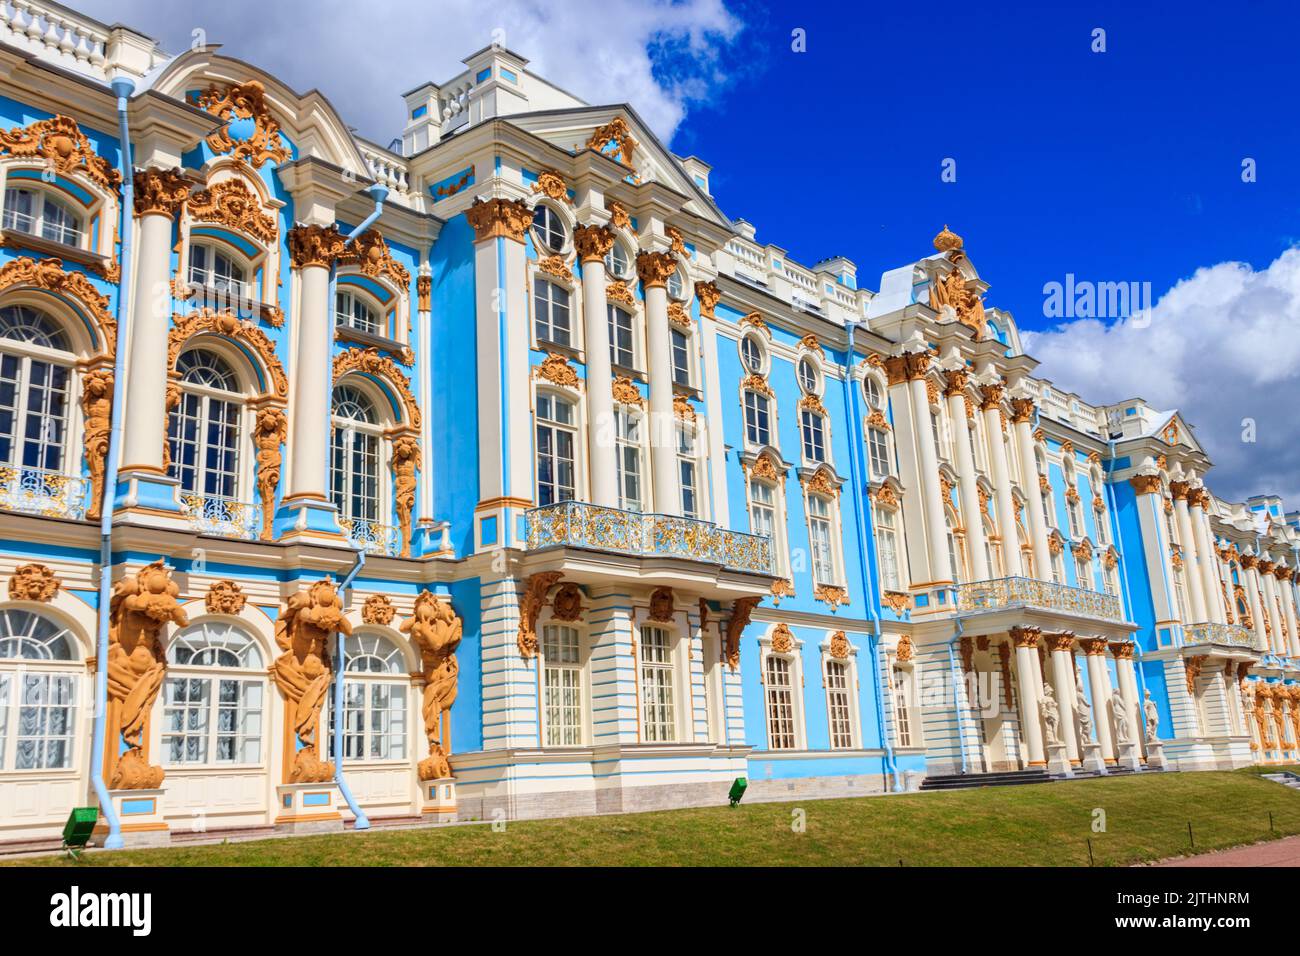 Catherine Palace is a Rococo palace located in the town of Tsarskoye Selo (Pushkin), 30 km south of Saint Petersburg, Russia. It was the summer reside Stock Photo